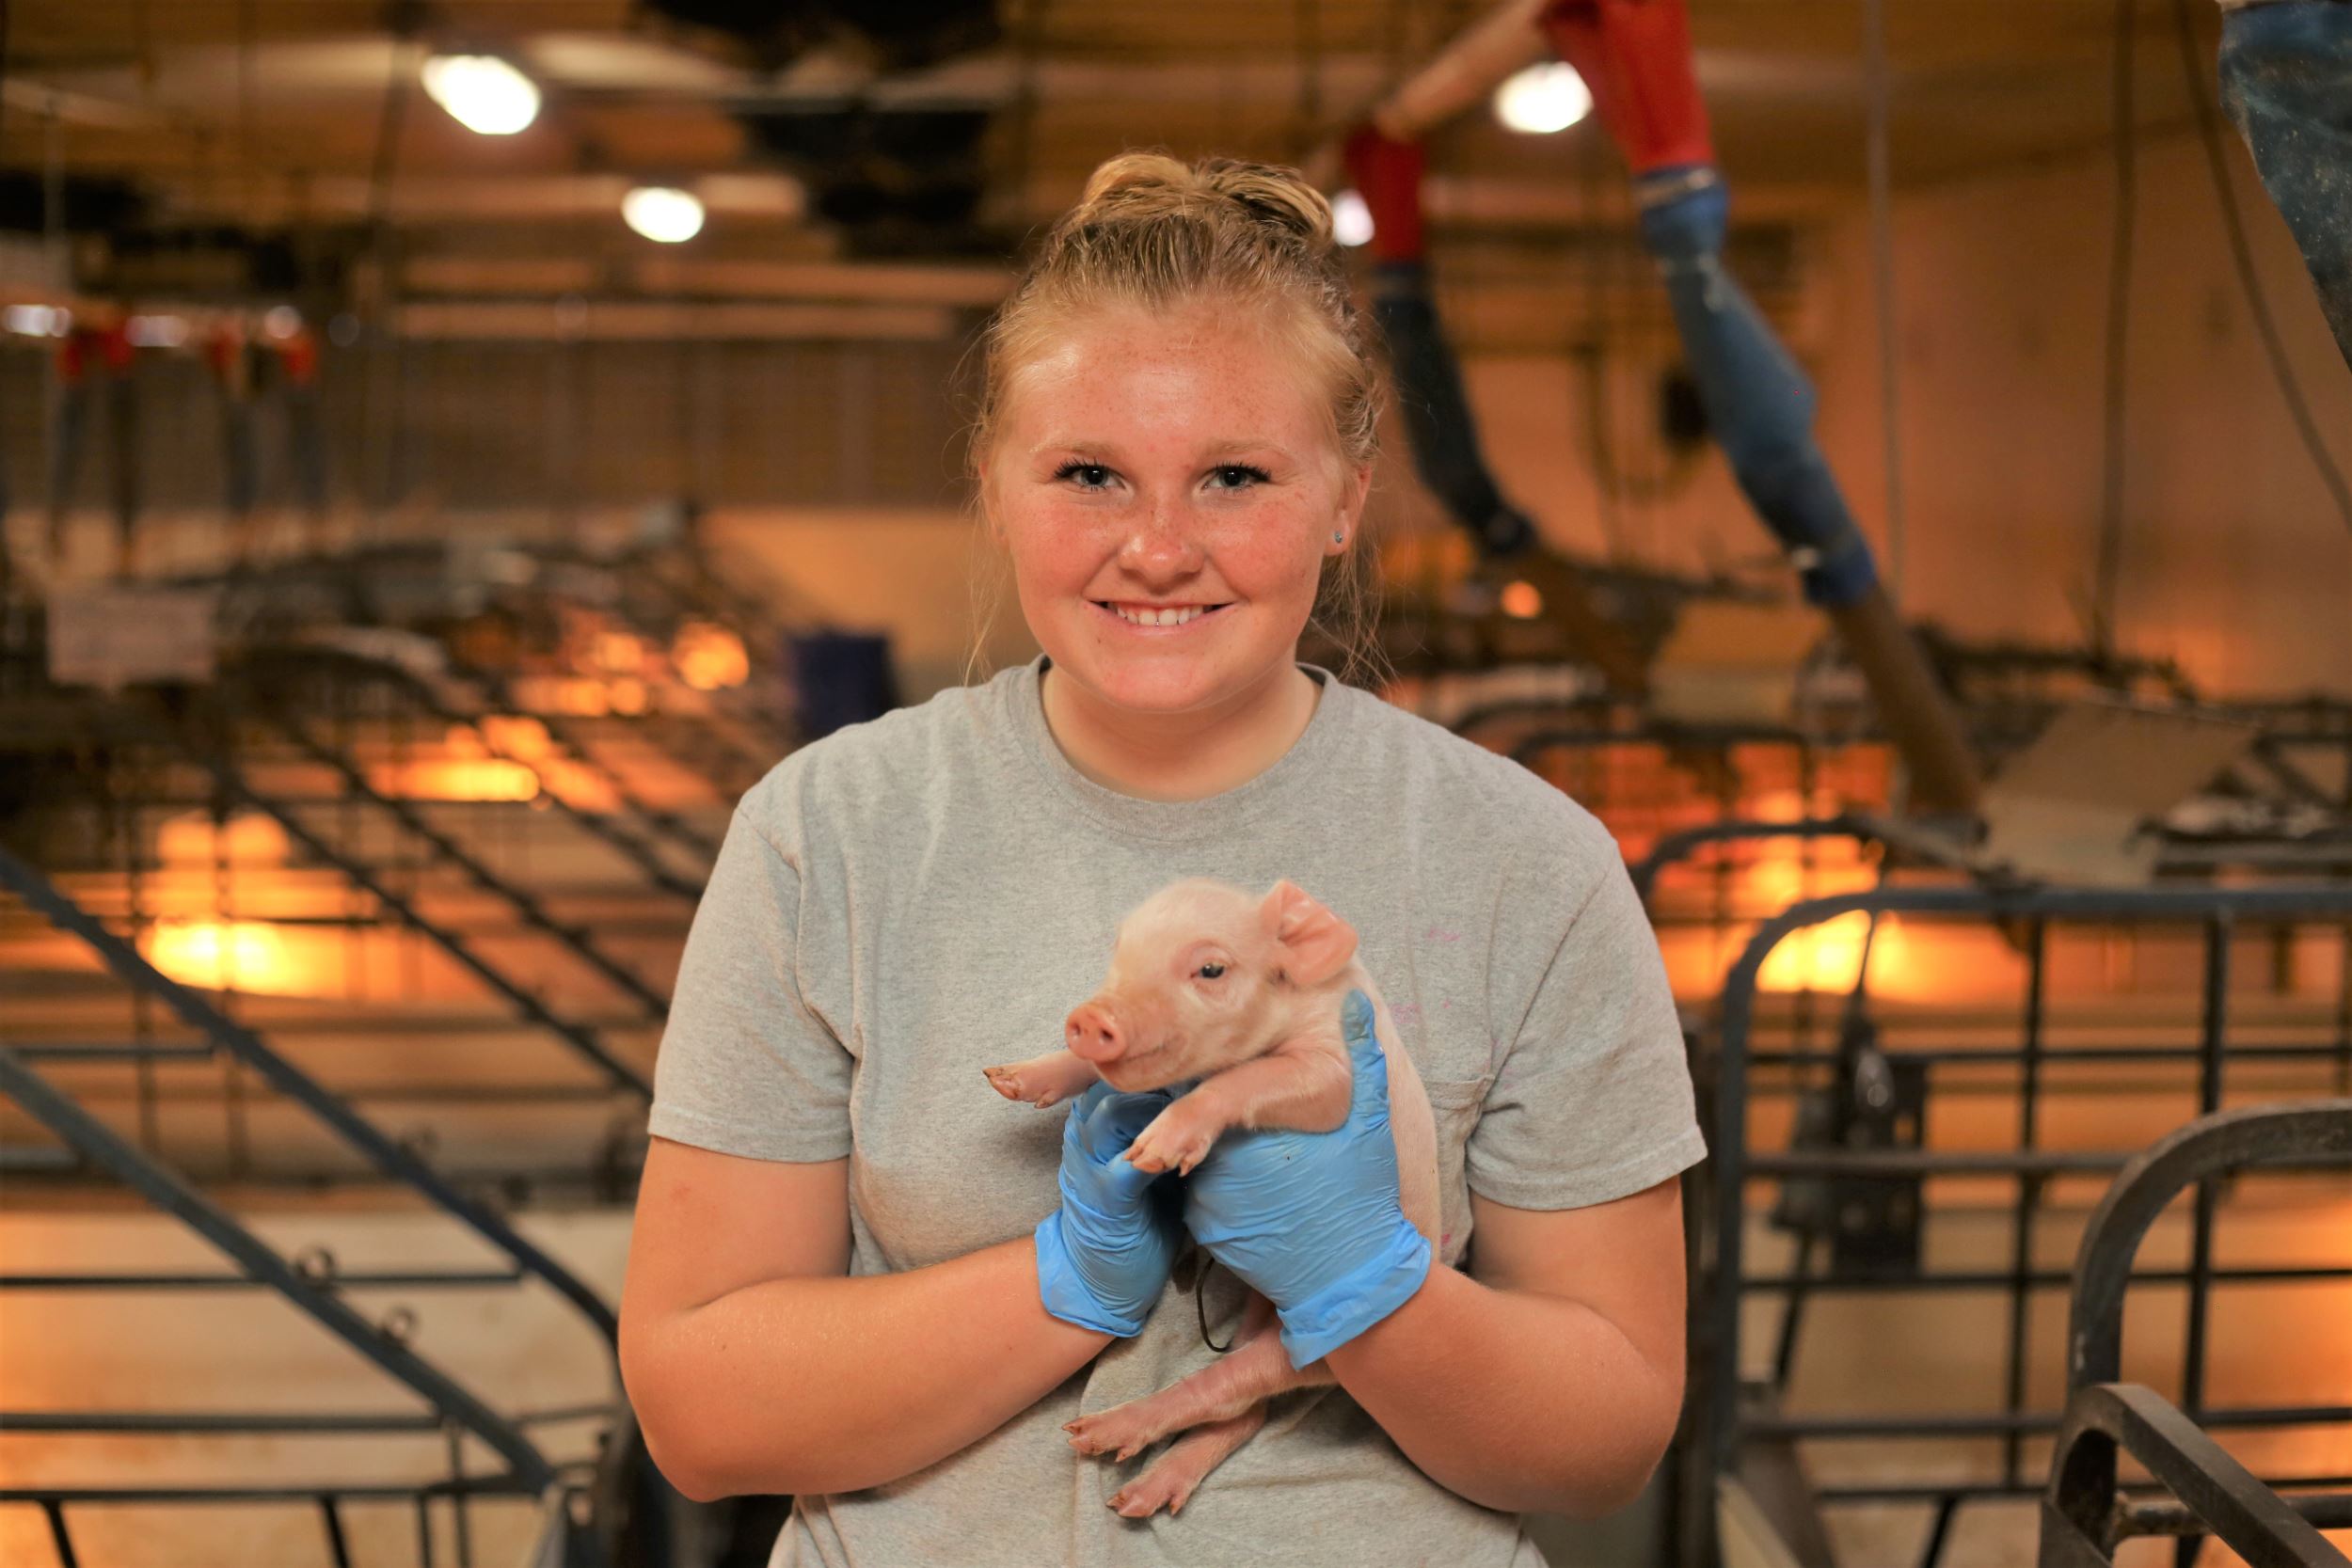 Kenzie holds a baby piglet.